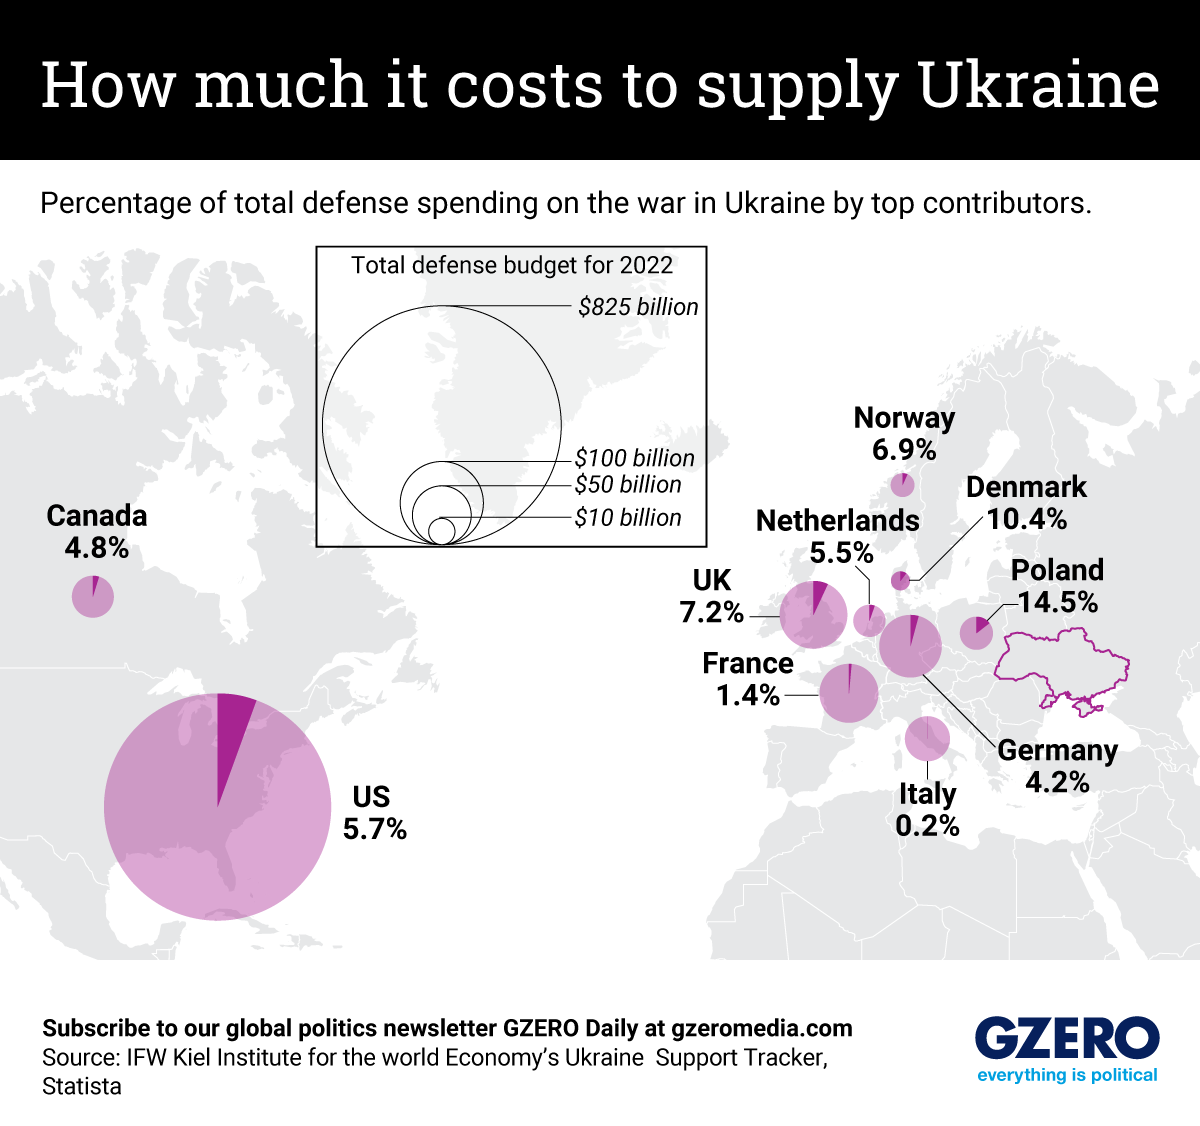 Total spending on military aid to Ukraine by top contributors as a percentage of their respective defense budgets.